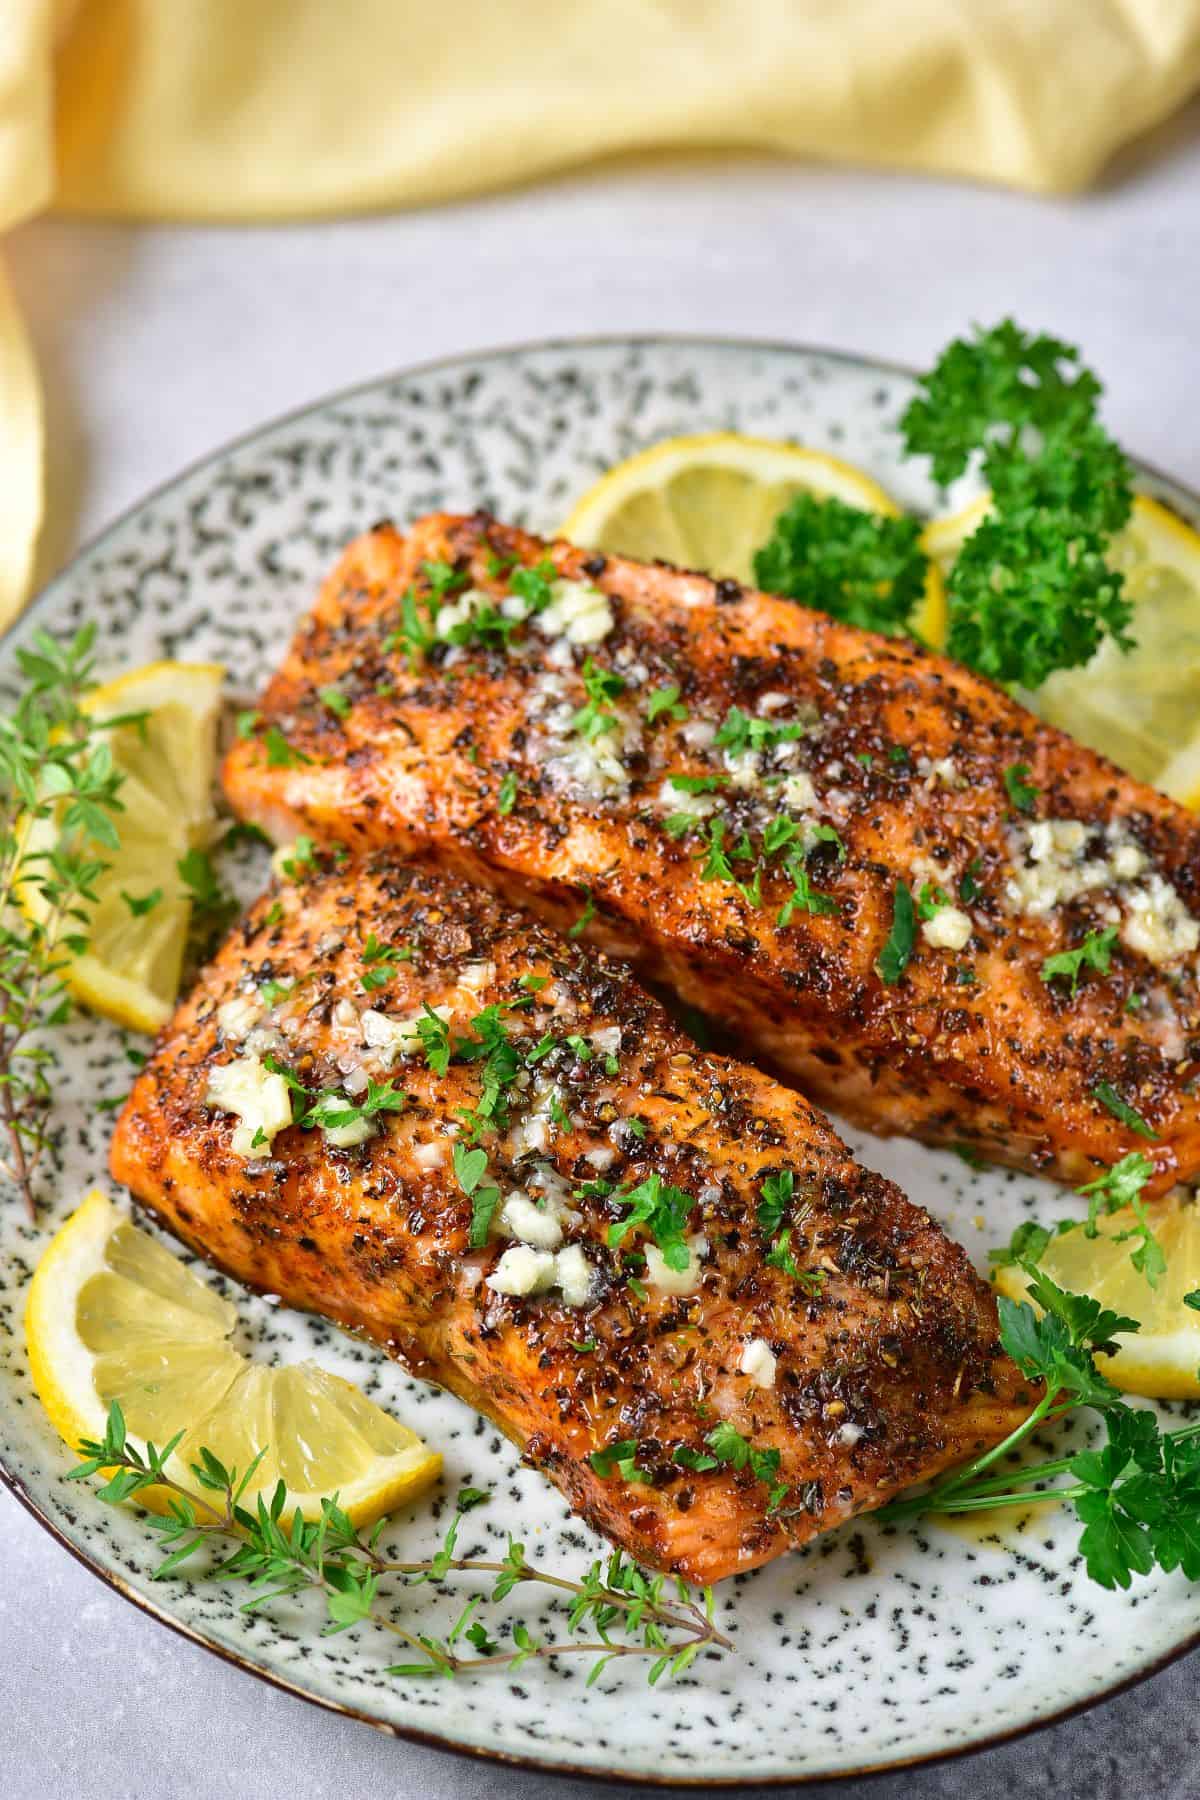 Two fillets of salmon on a plate with lemons and herbs, and garnished with parsley.